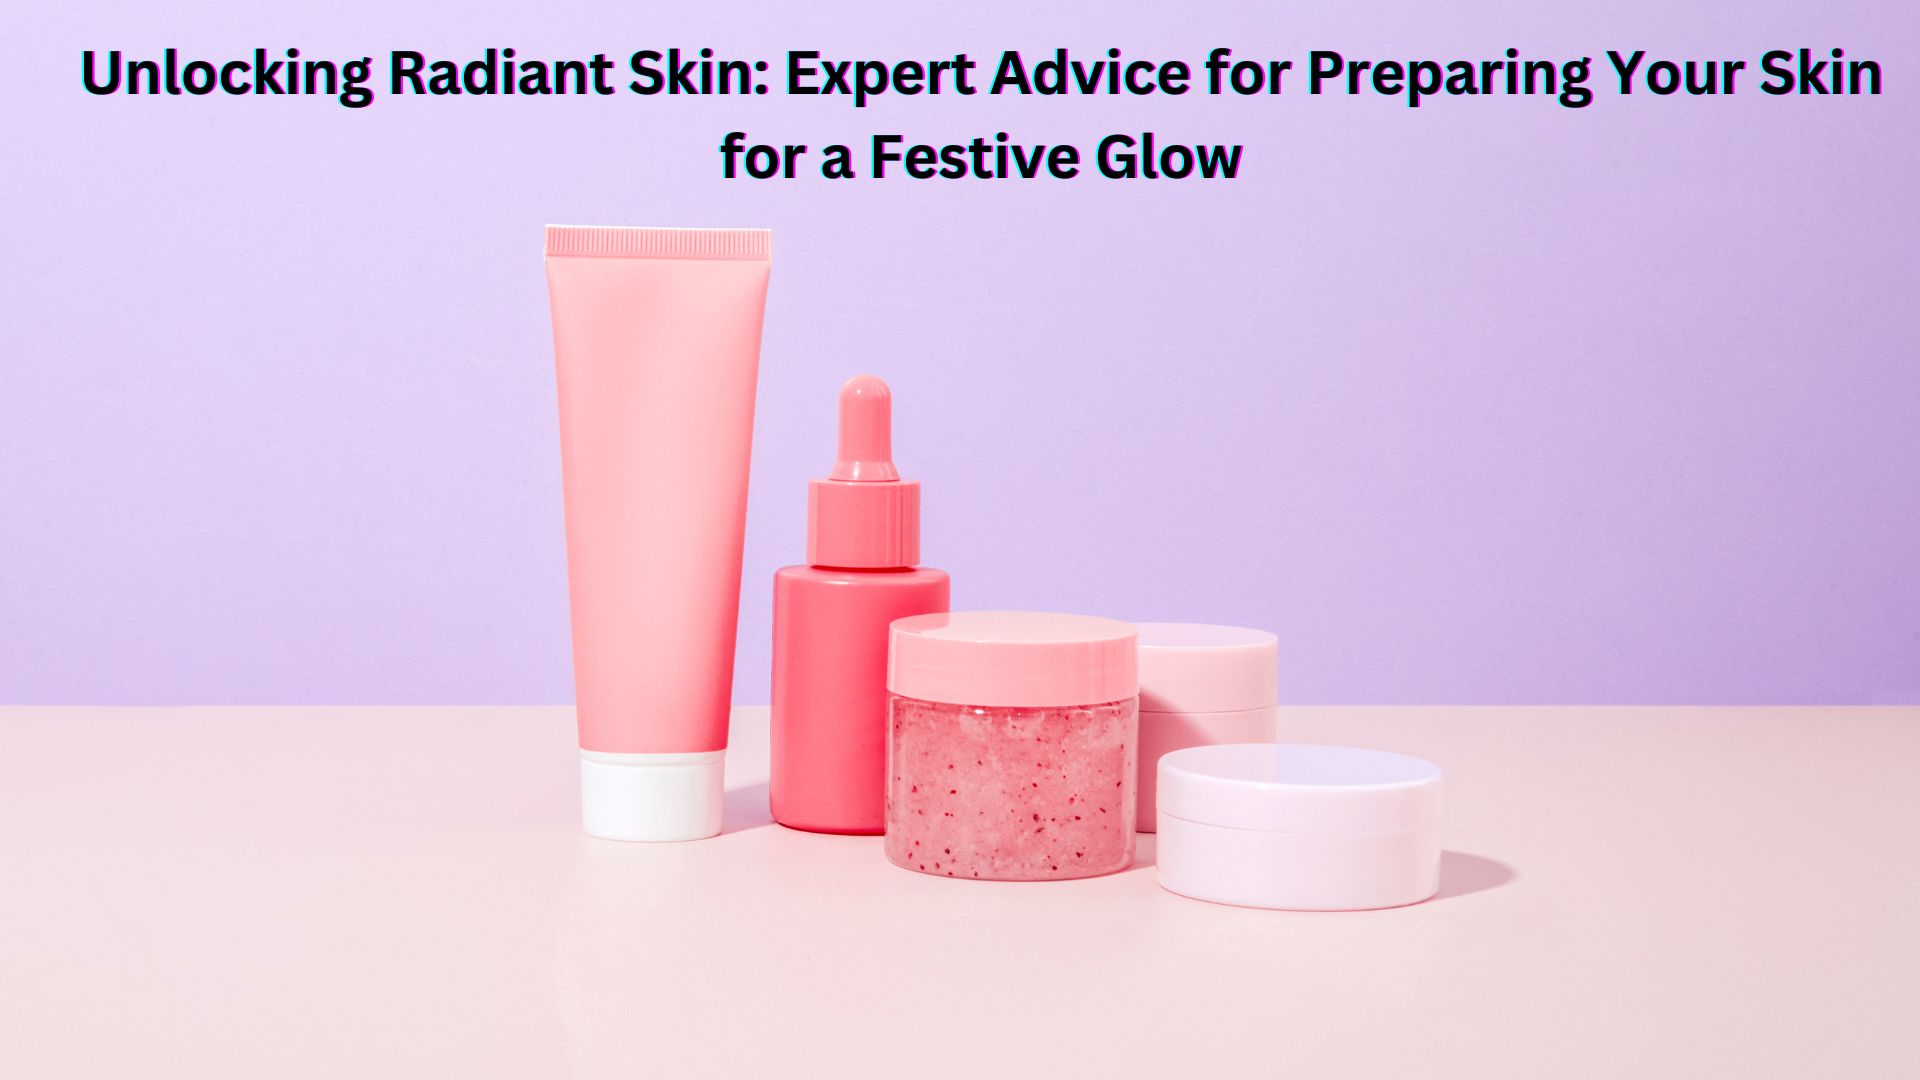 Unlocking Radiant Skin: Expert Advice for Preparing Your Skin for a Festive Glow